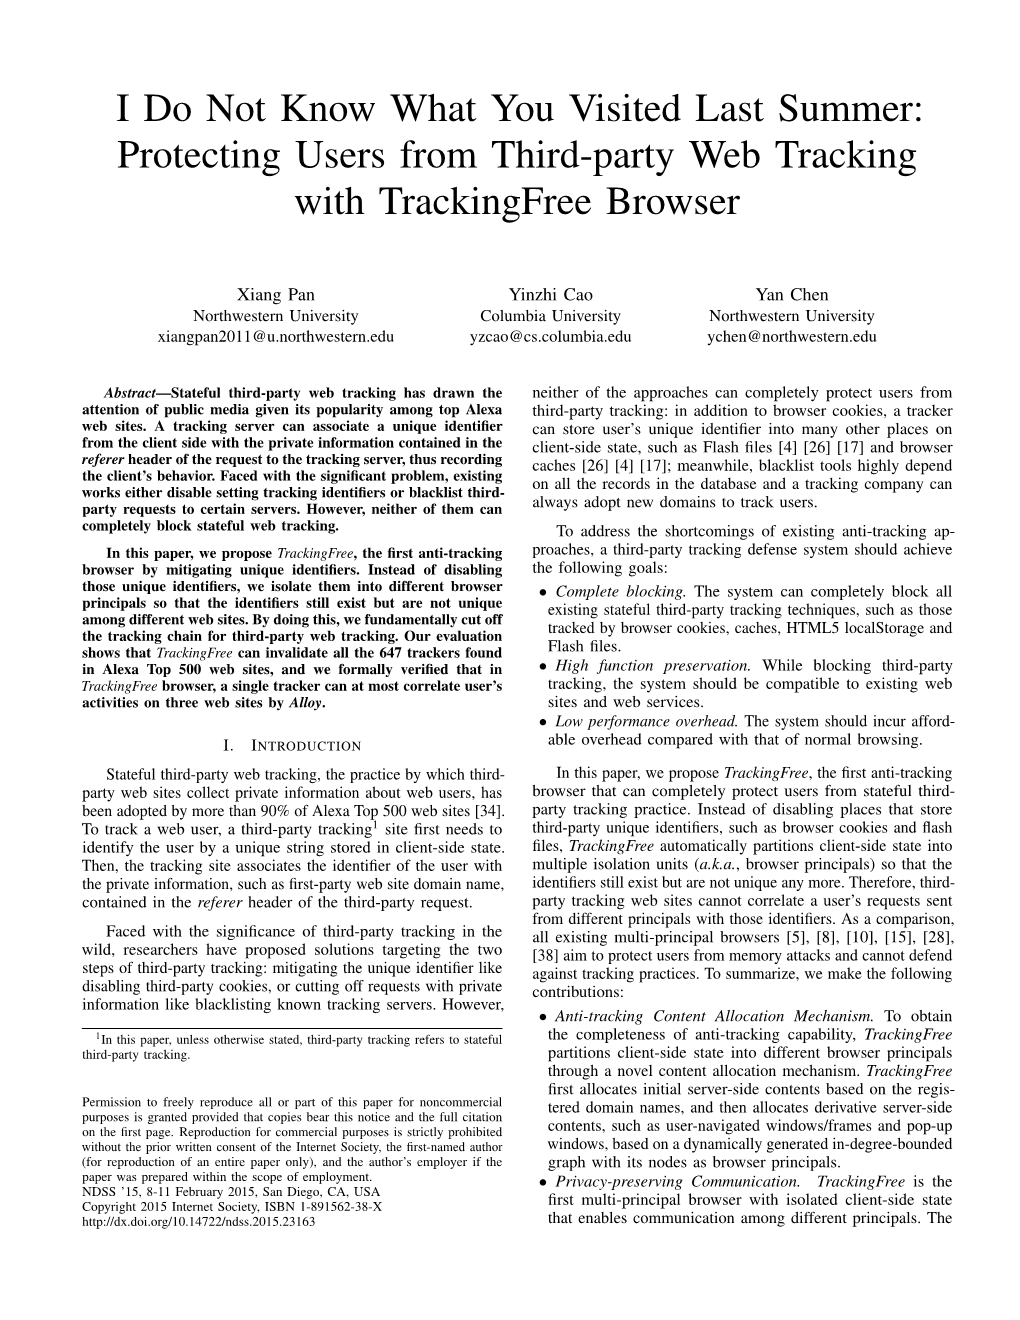 Protecting Users from Third-Party Web Tracking with Trackingfree Browser